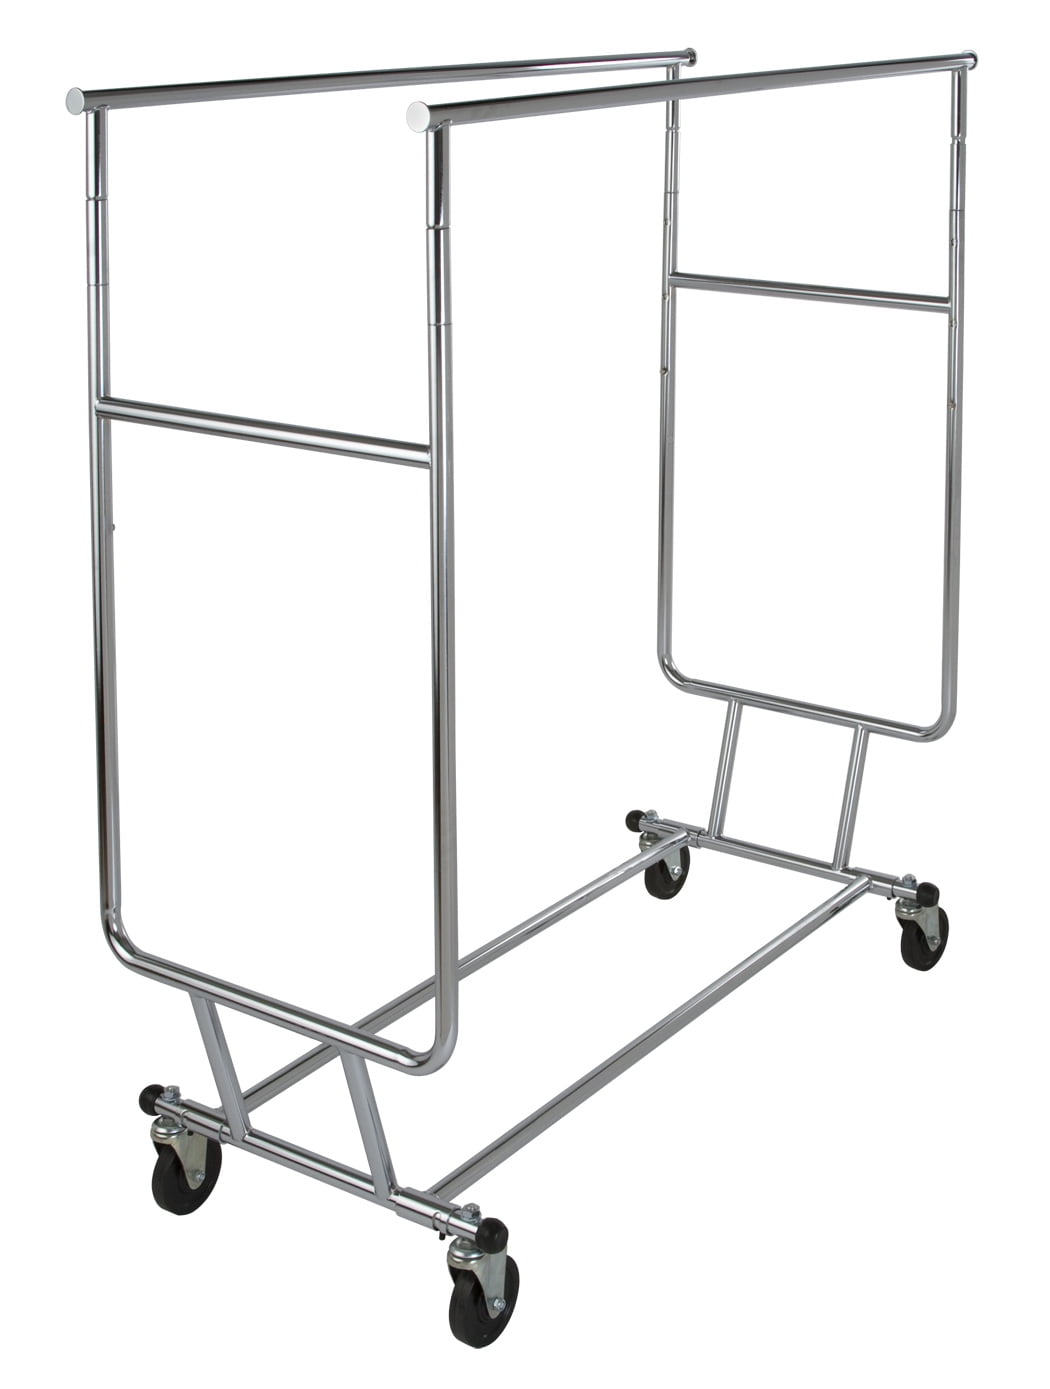 Details about   72" Rolling Garment Rack Collapsible Heavy Duty Clothing Hanging Storing Silver 